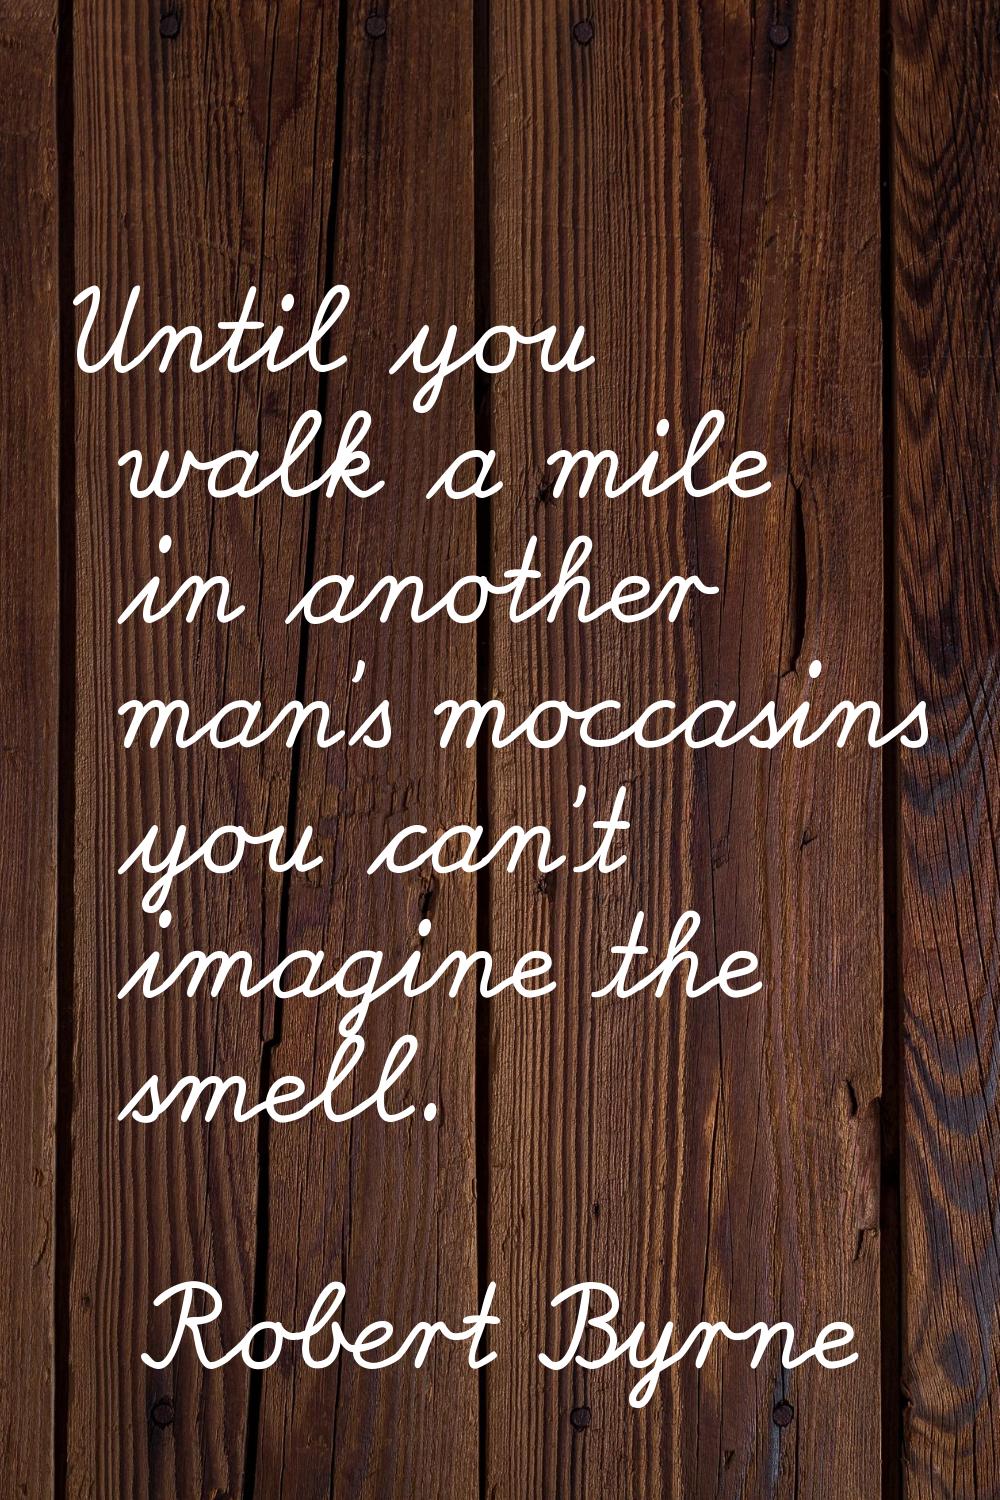 Until you walk a mile in another man's moccasins you can't imagine the smell.